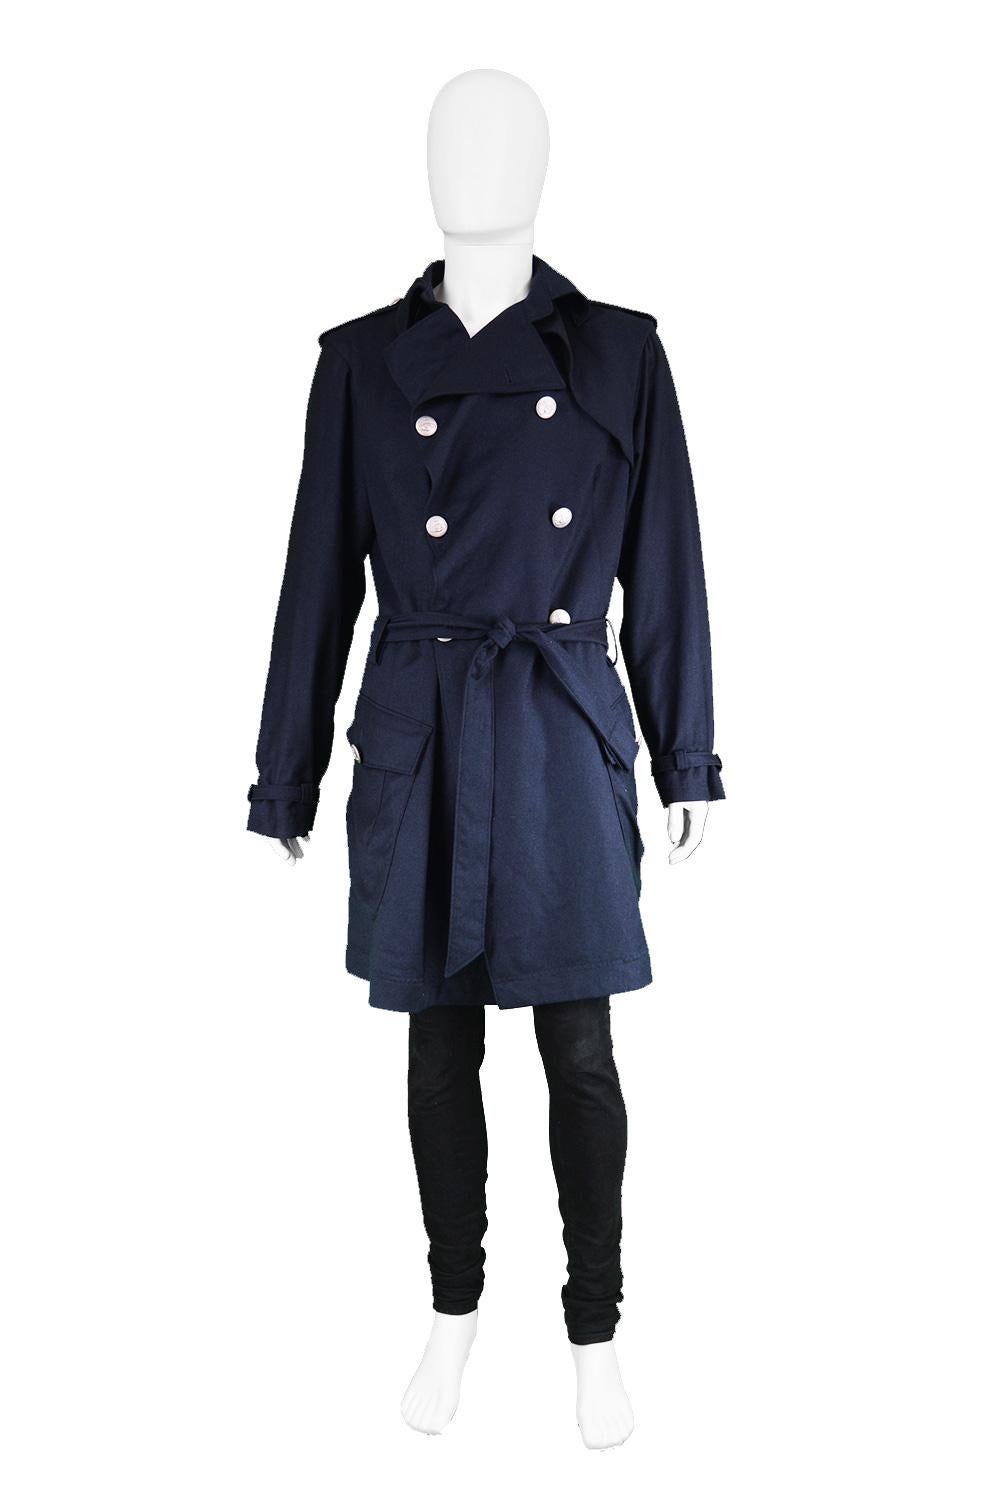 Vivienne Westwood Mens Dark Blue Wool Belted Trenchcoat

Size: Marked EU 50 which is roughly a men's Medium to Large. Please check measurements. 
Chest - 44” / 112cm (allow 2-4